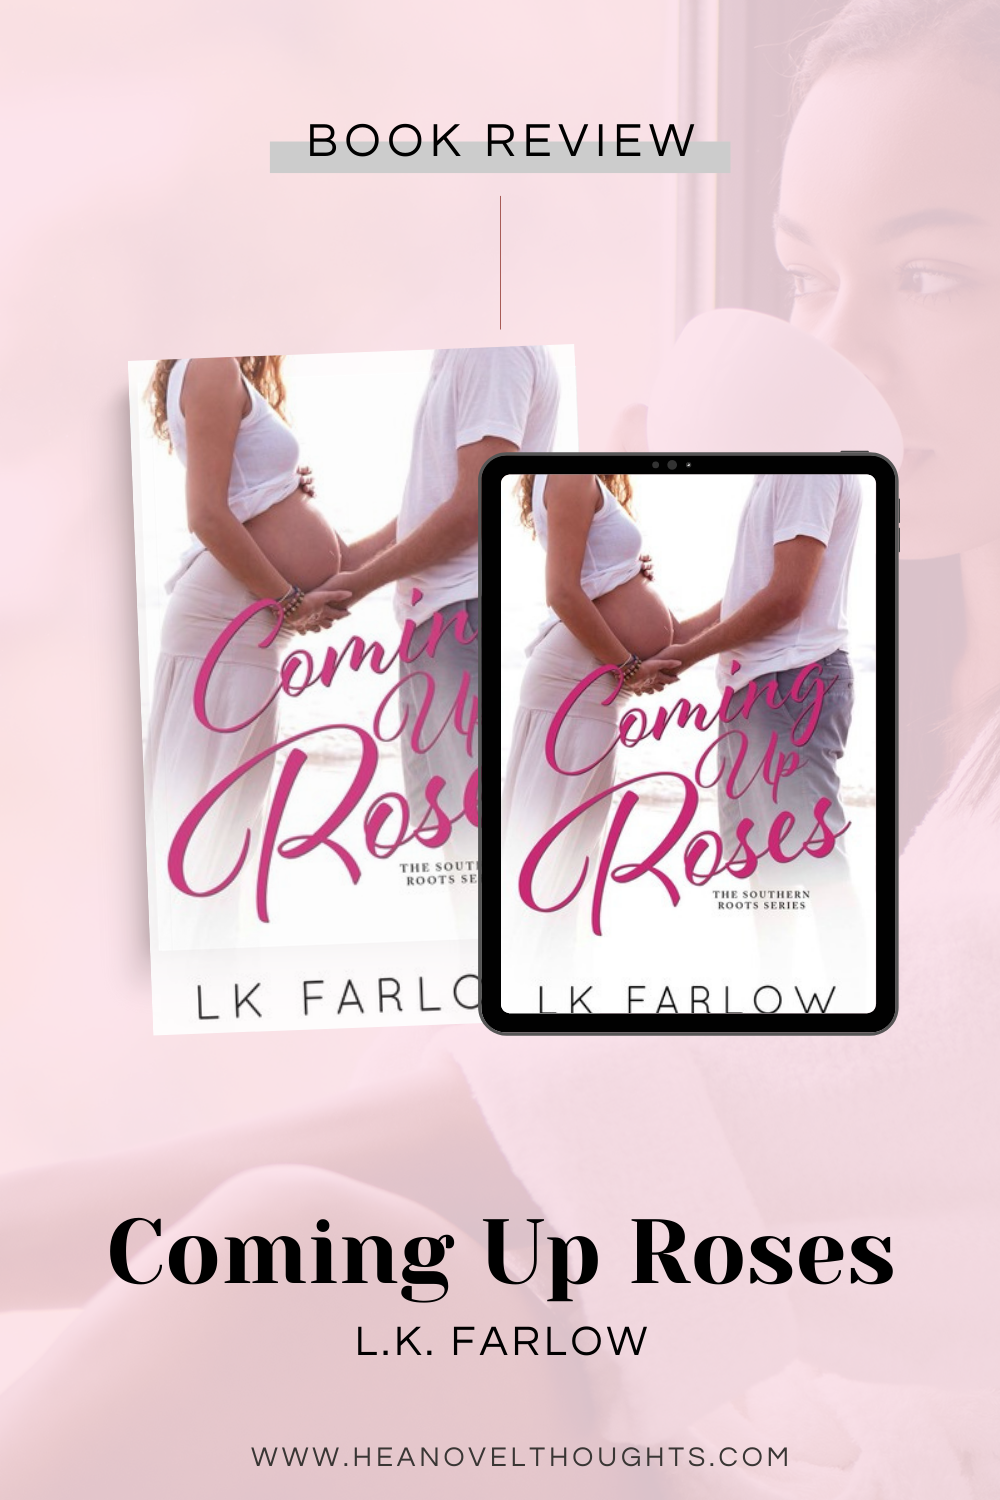 Coming Up Roses by LK Farlow